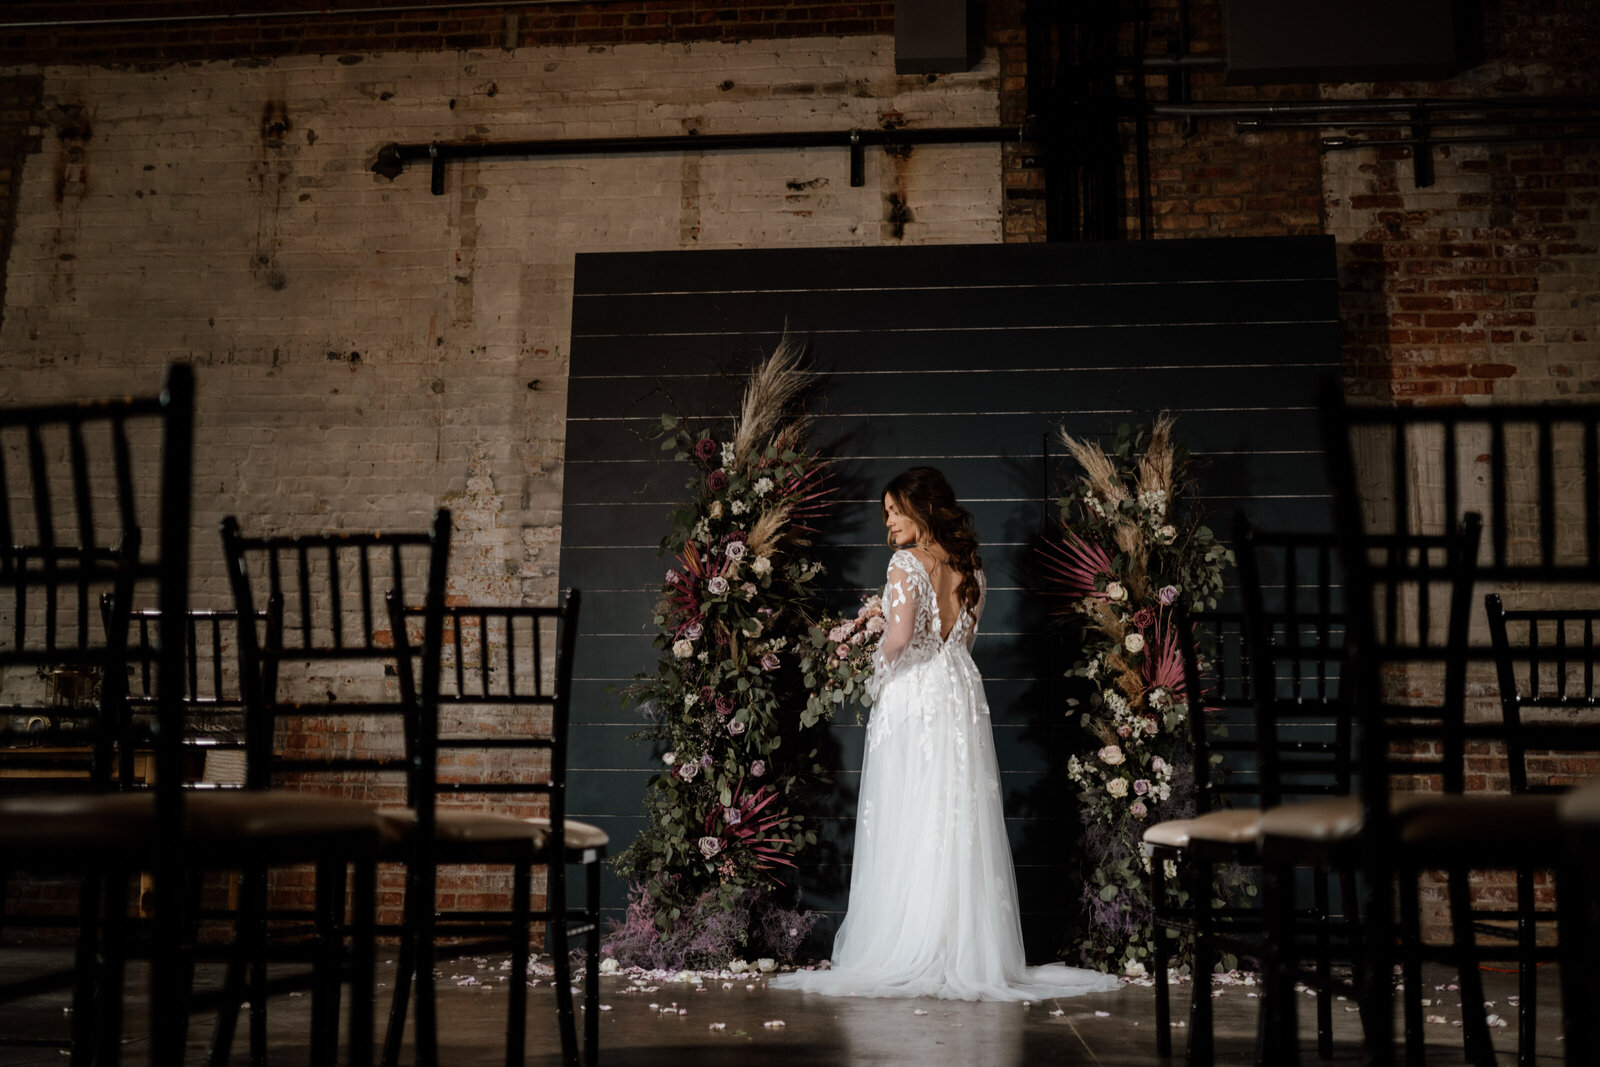 011-Millennium-Moments_Chicago-Wedding-Photographer_Sanctuary_Plainfield-Illinois-Wedding-Venue_Rustic_Wags-2-Wishes_Ceremony-Stemming-From-Love_Bella-Sposa-Tinley-Park